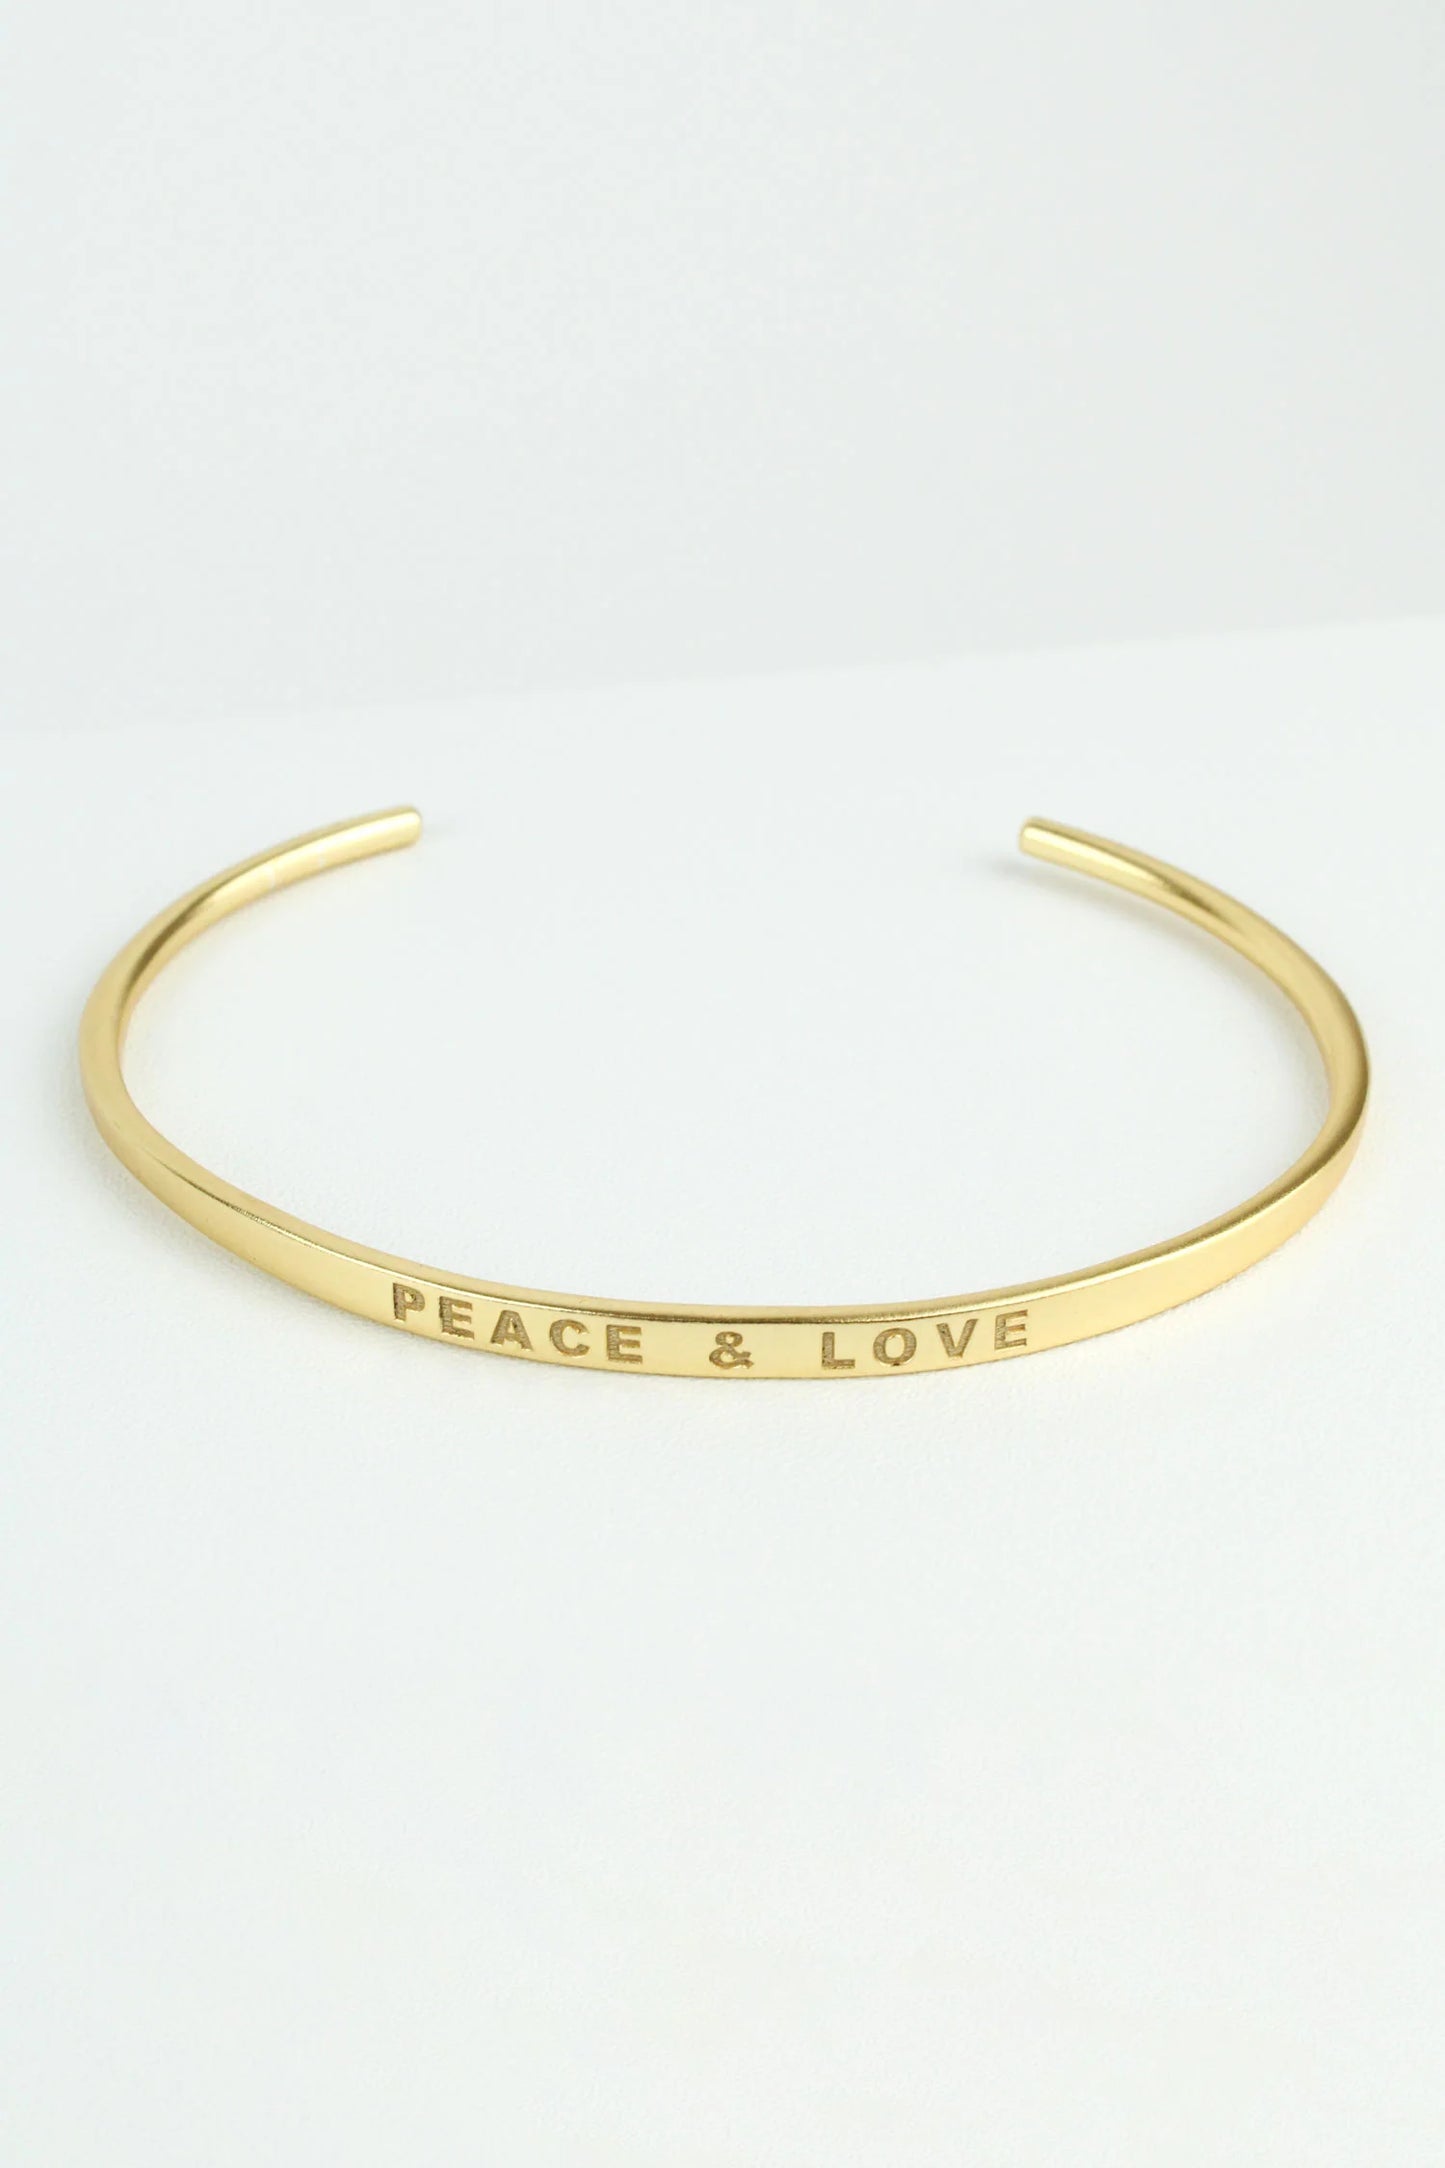 The Every Space handcrafted, delicate gold bangle with 'Peace and Love' feature stamped and adjustable fit by My Doris